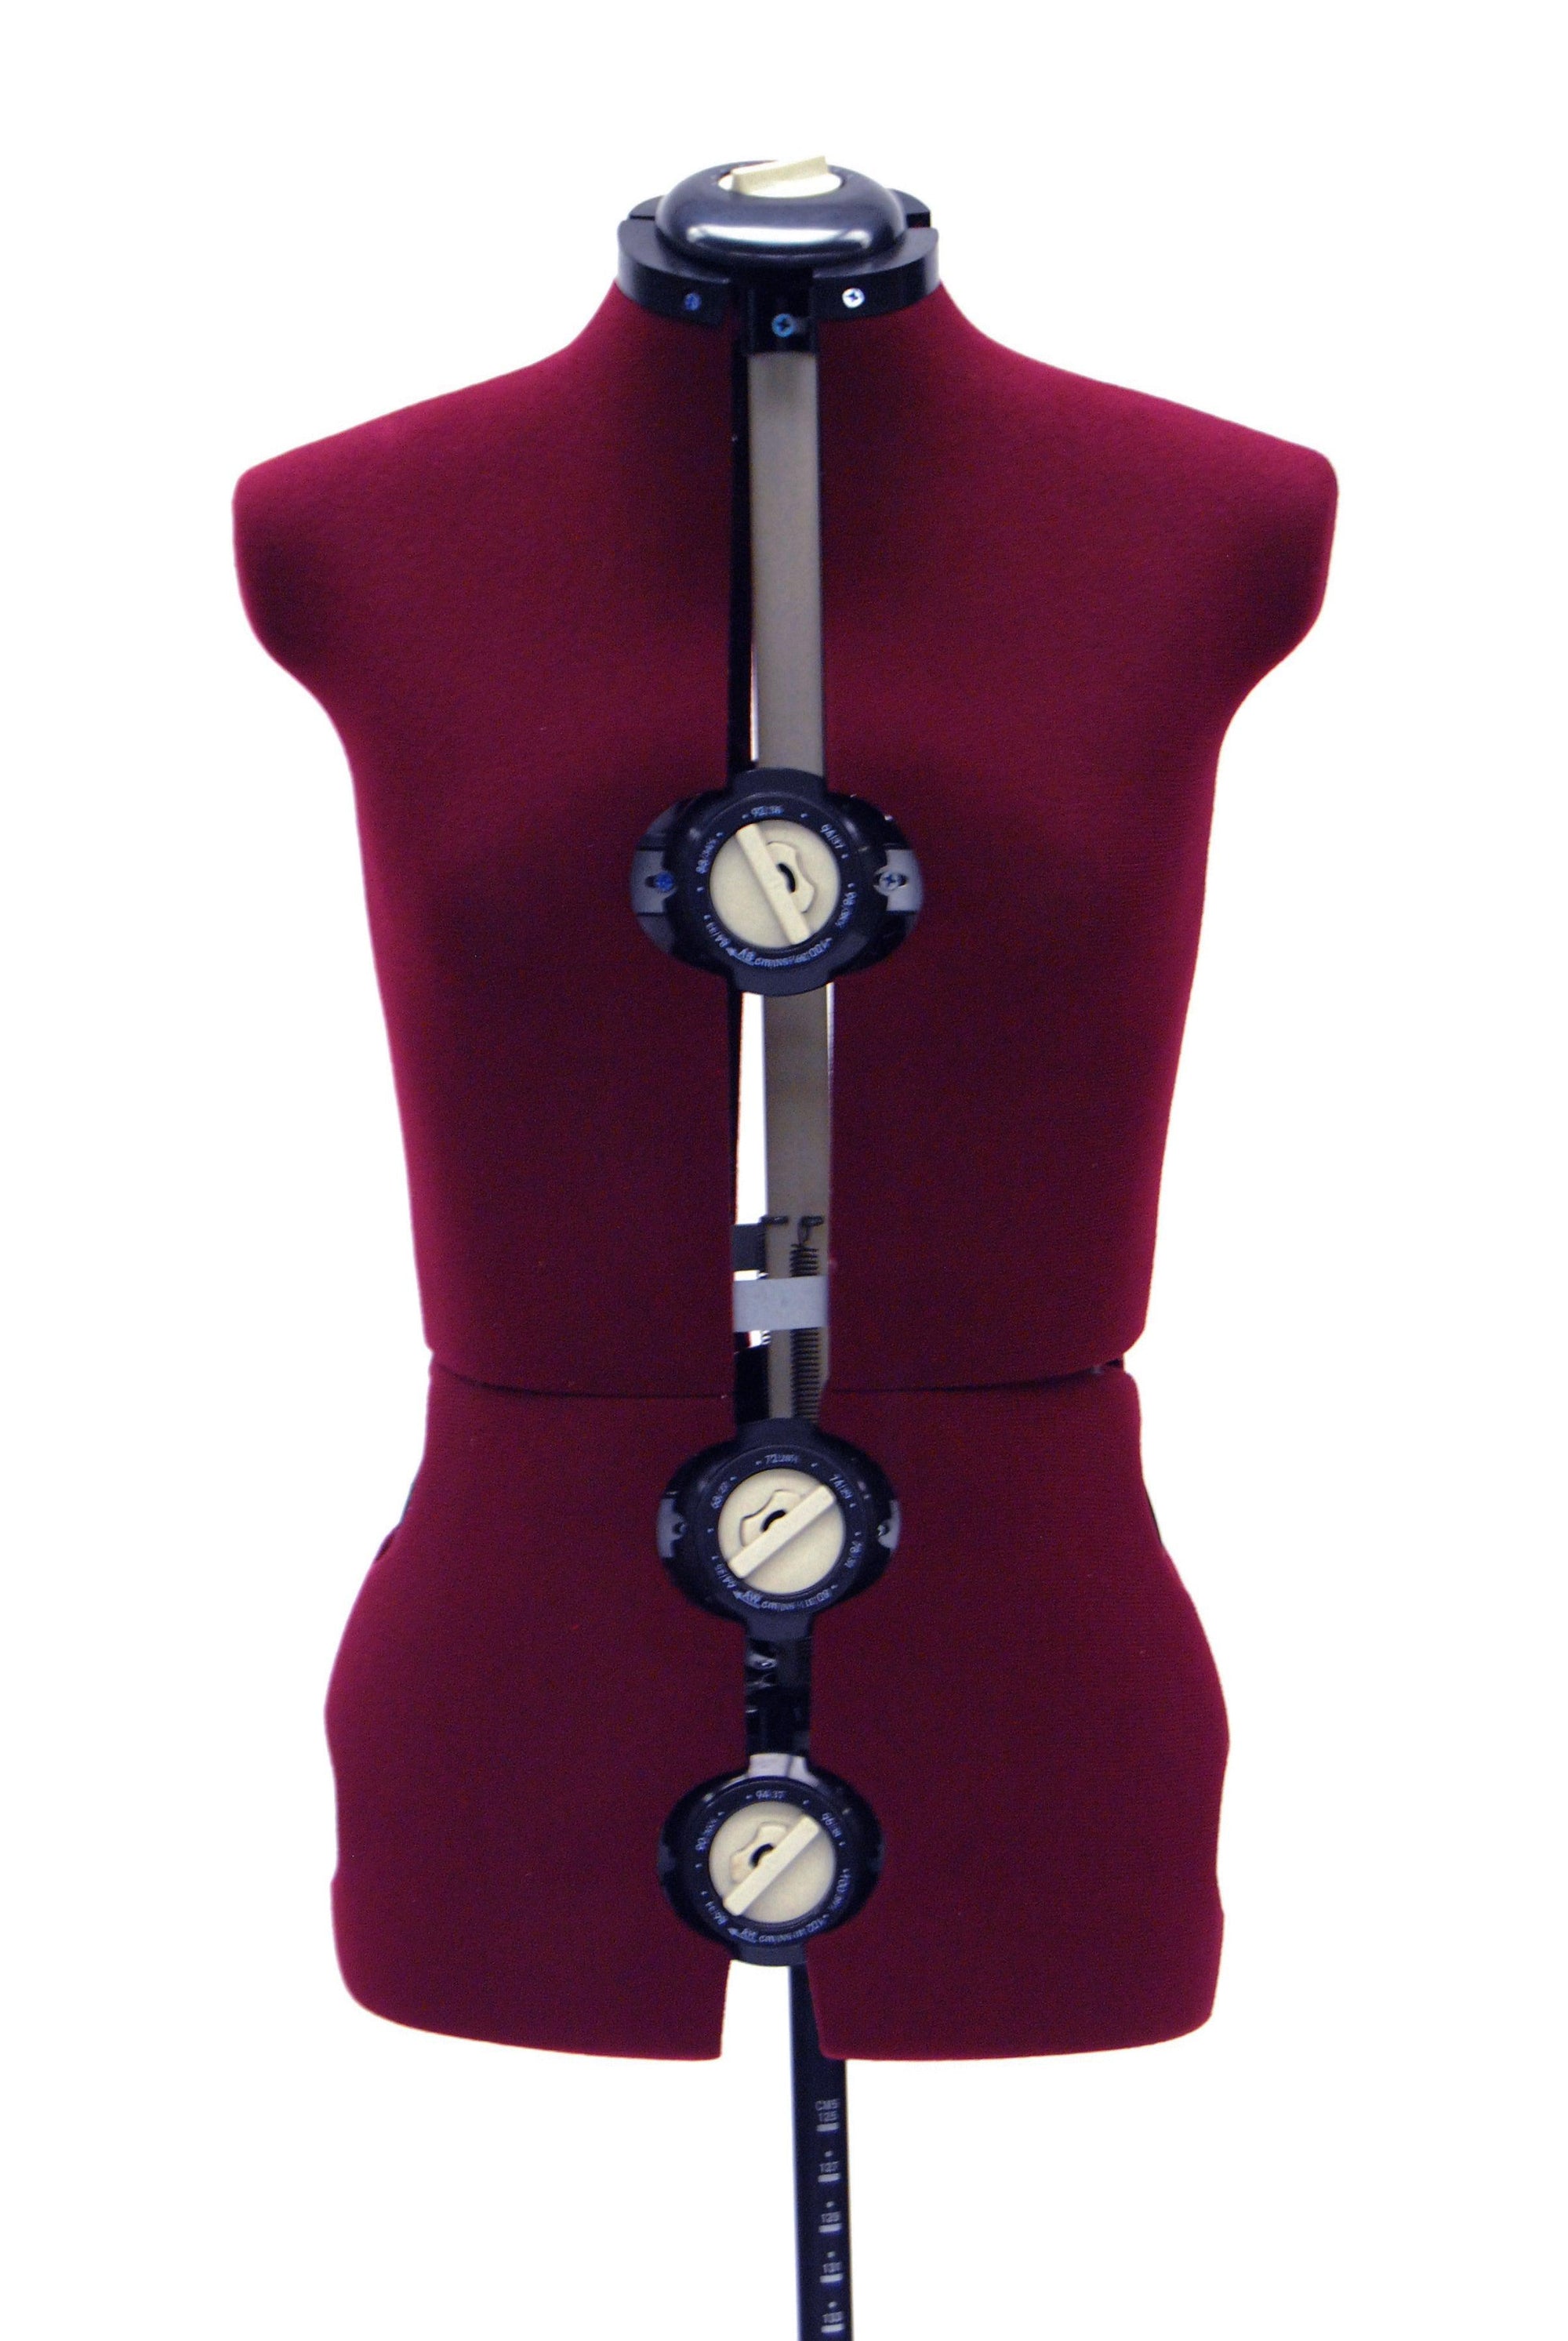 Female Small Adjustable Dress Form MM-JFFH2 - Mannequin Mall